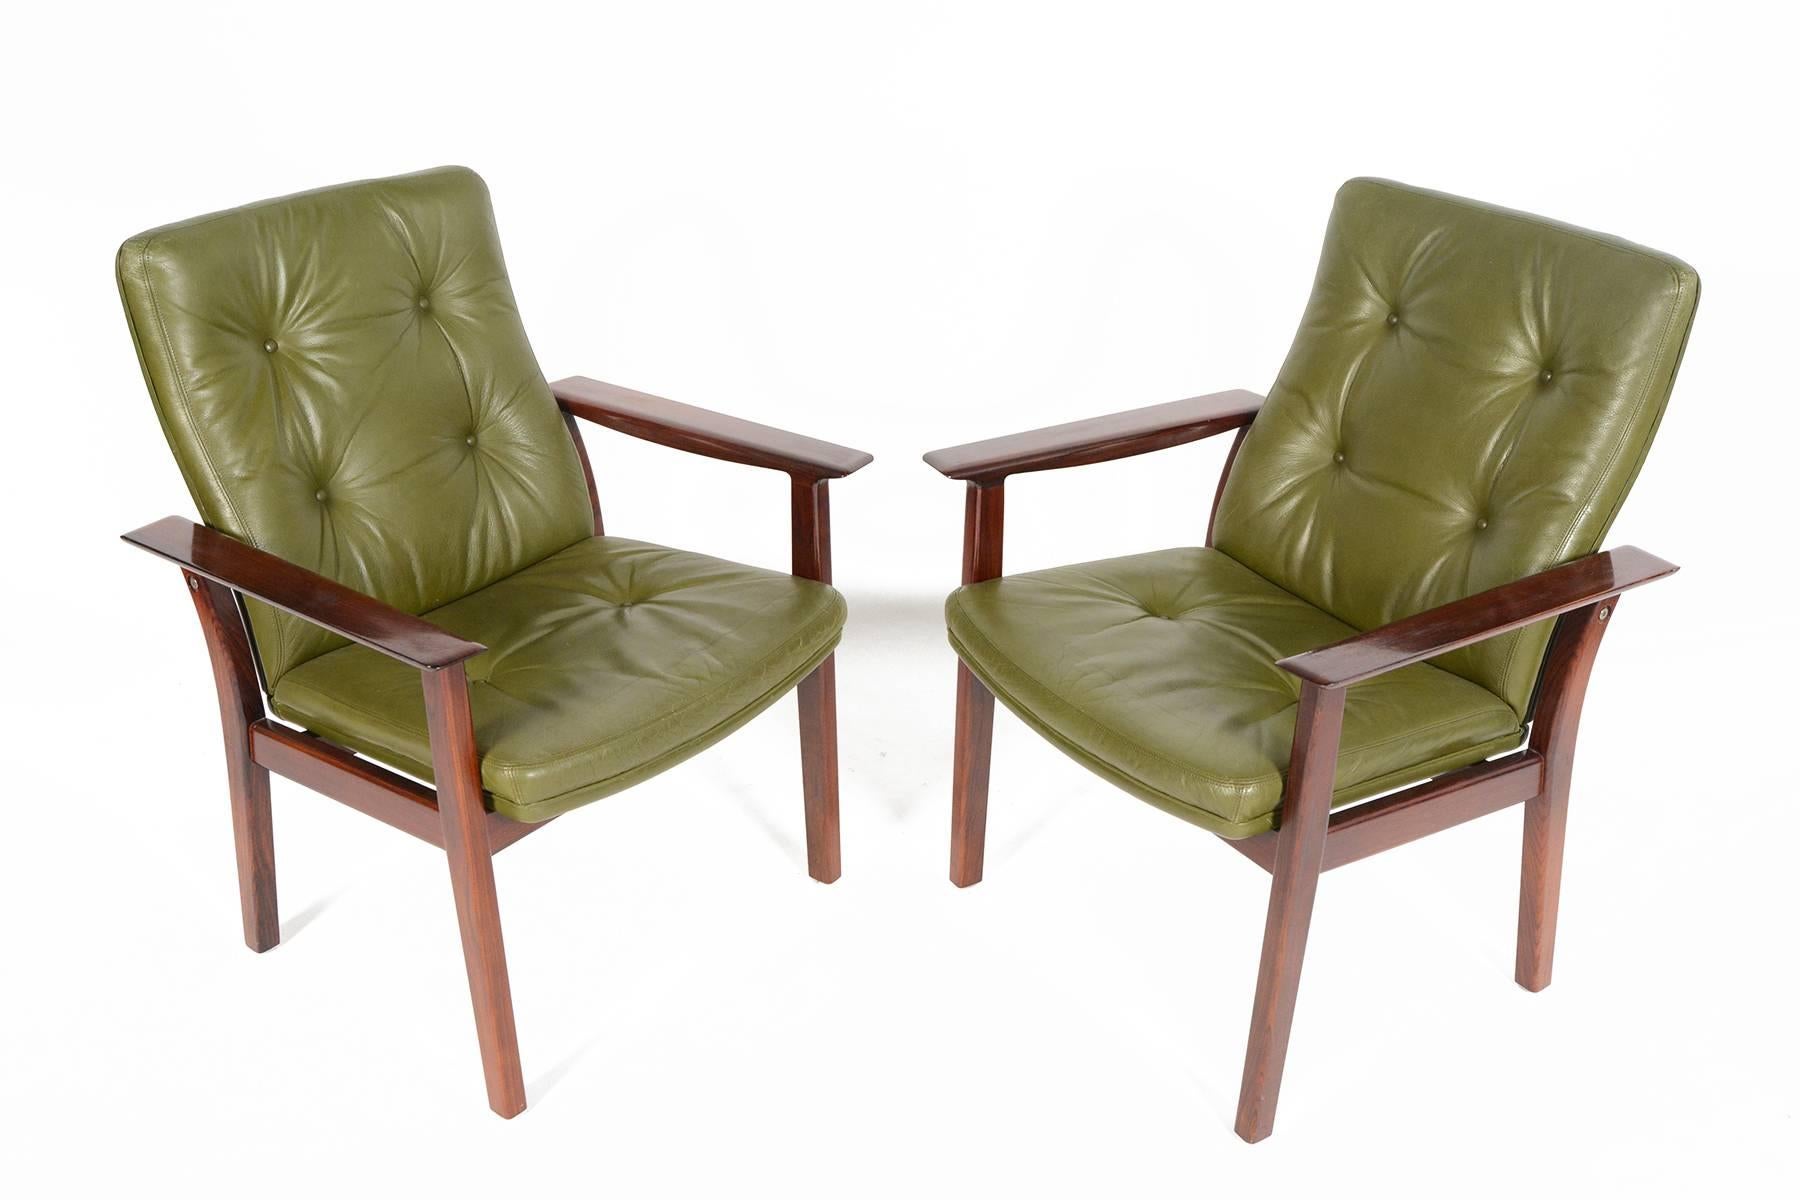 This gorgeous pair of armchairs was designed by Arne Vodder for Sibast Møblerfabrik in the 1960s. Crafted in beautiful solid Brazilian rosewood, these conference style chairs offer an excellent sculpted armrest, high back and lower back support. The